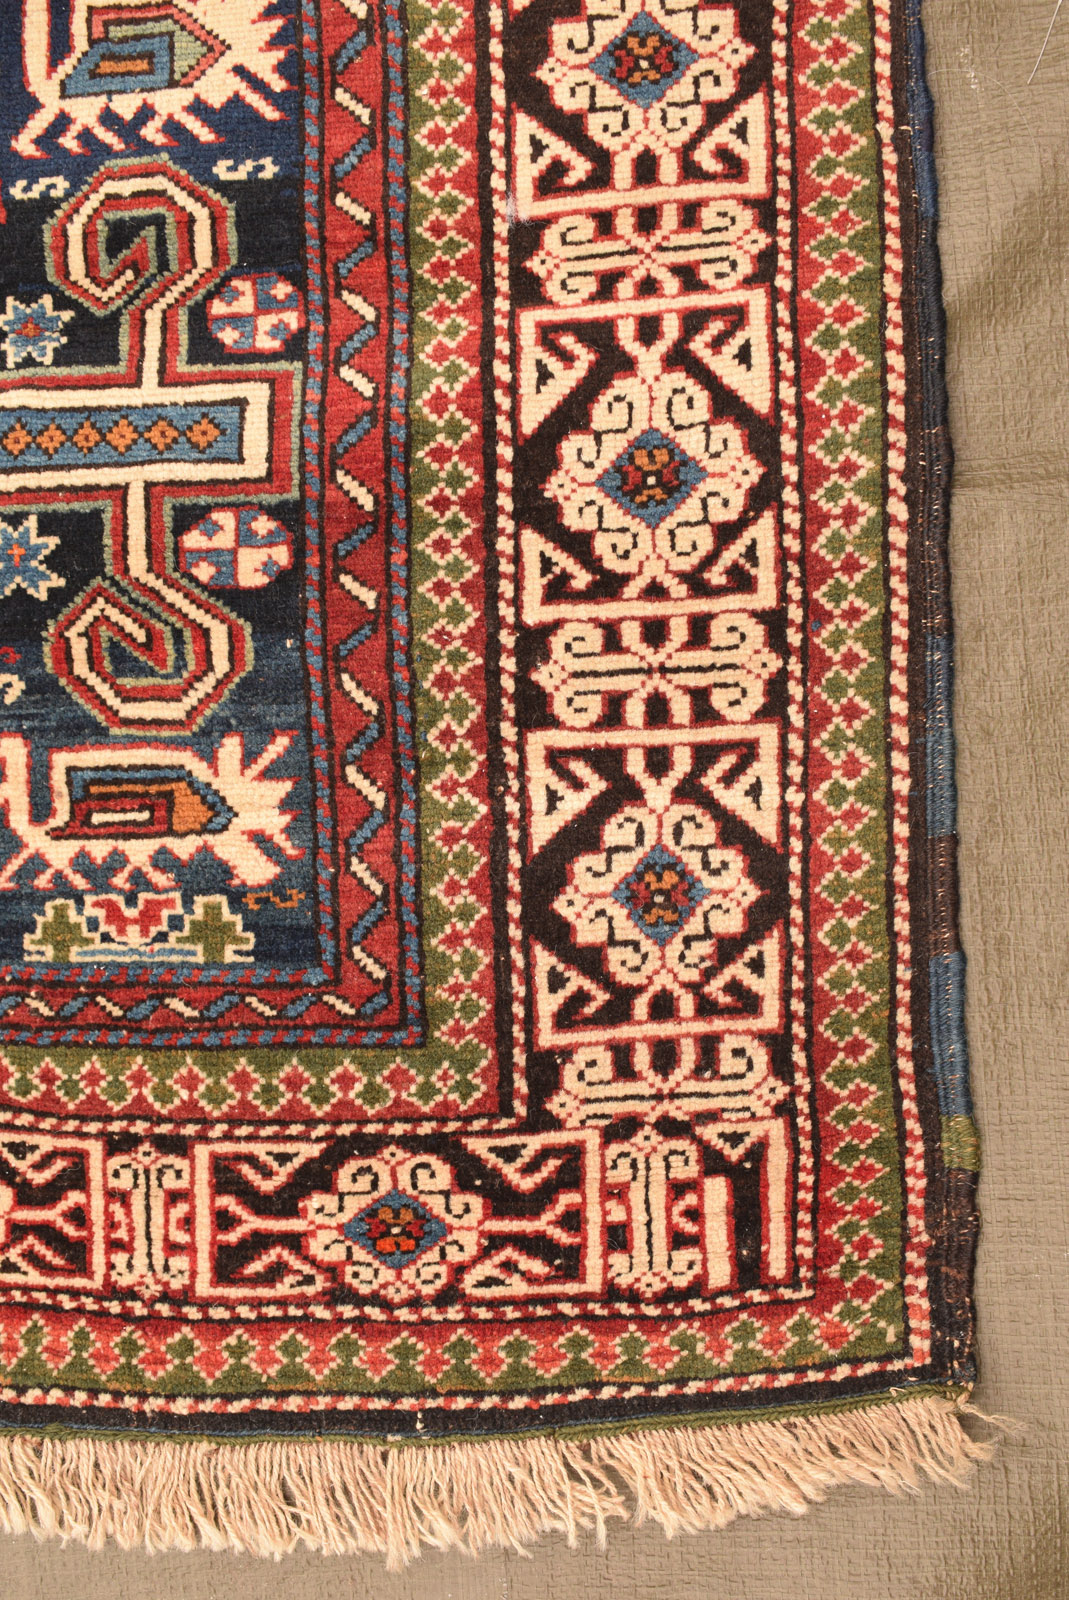 A PEREPEDIL RUG - Image 4 of 6